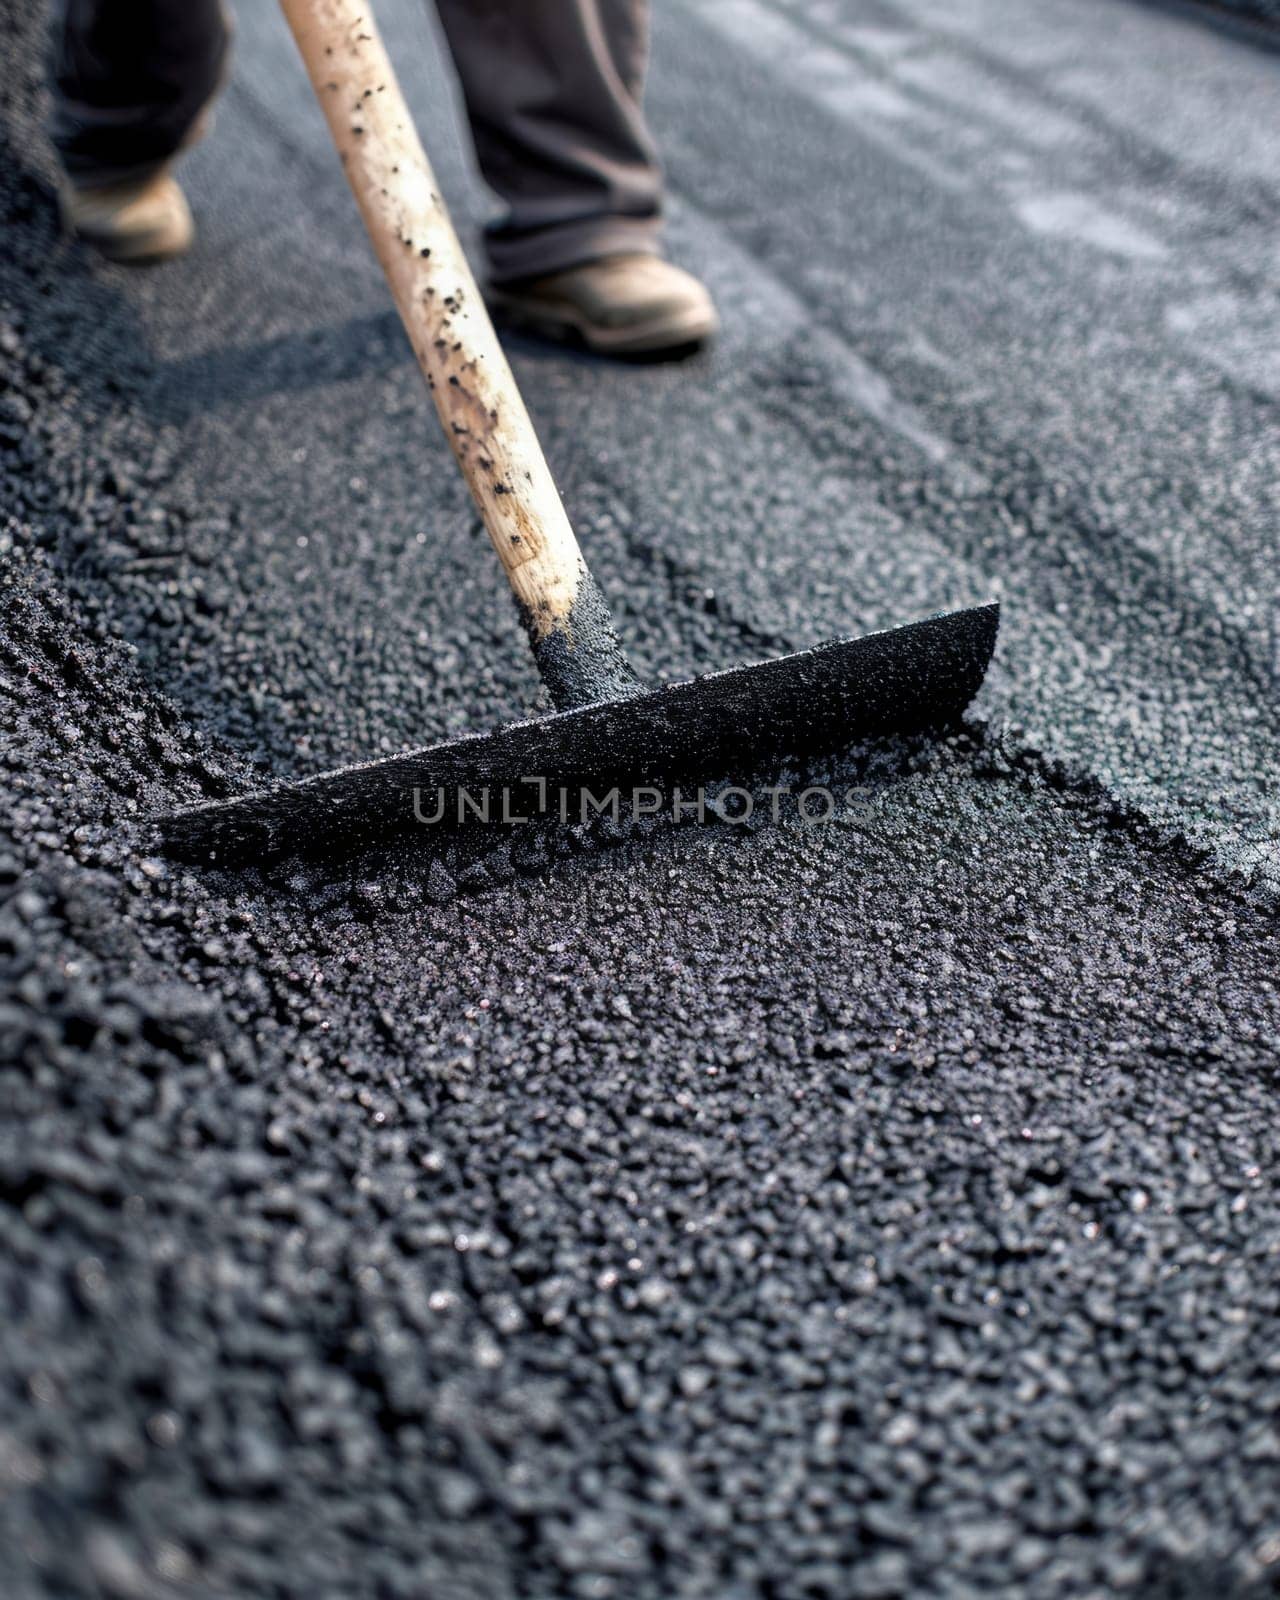 A construction worker in a reflective vest uses a metal rake to smooth and level a freshly paved asphalt road. by sfinks